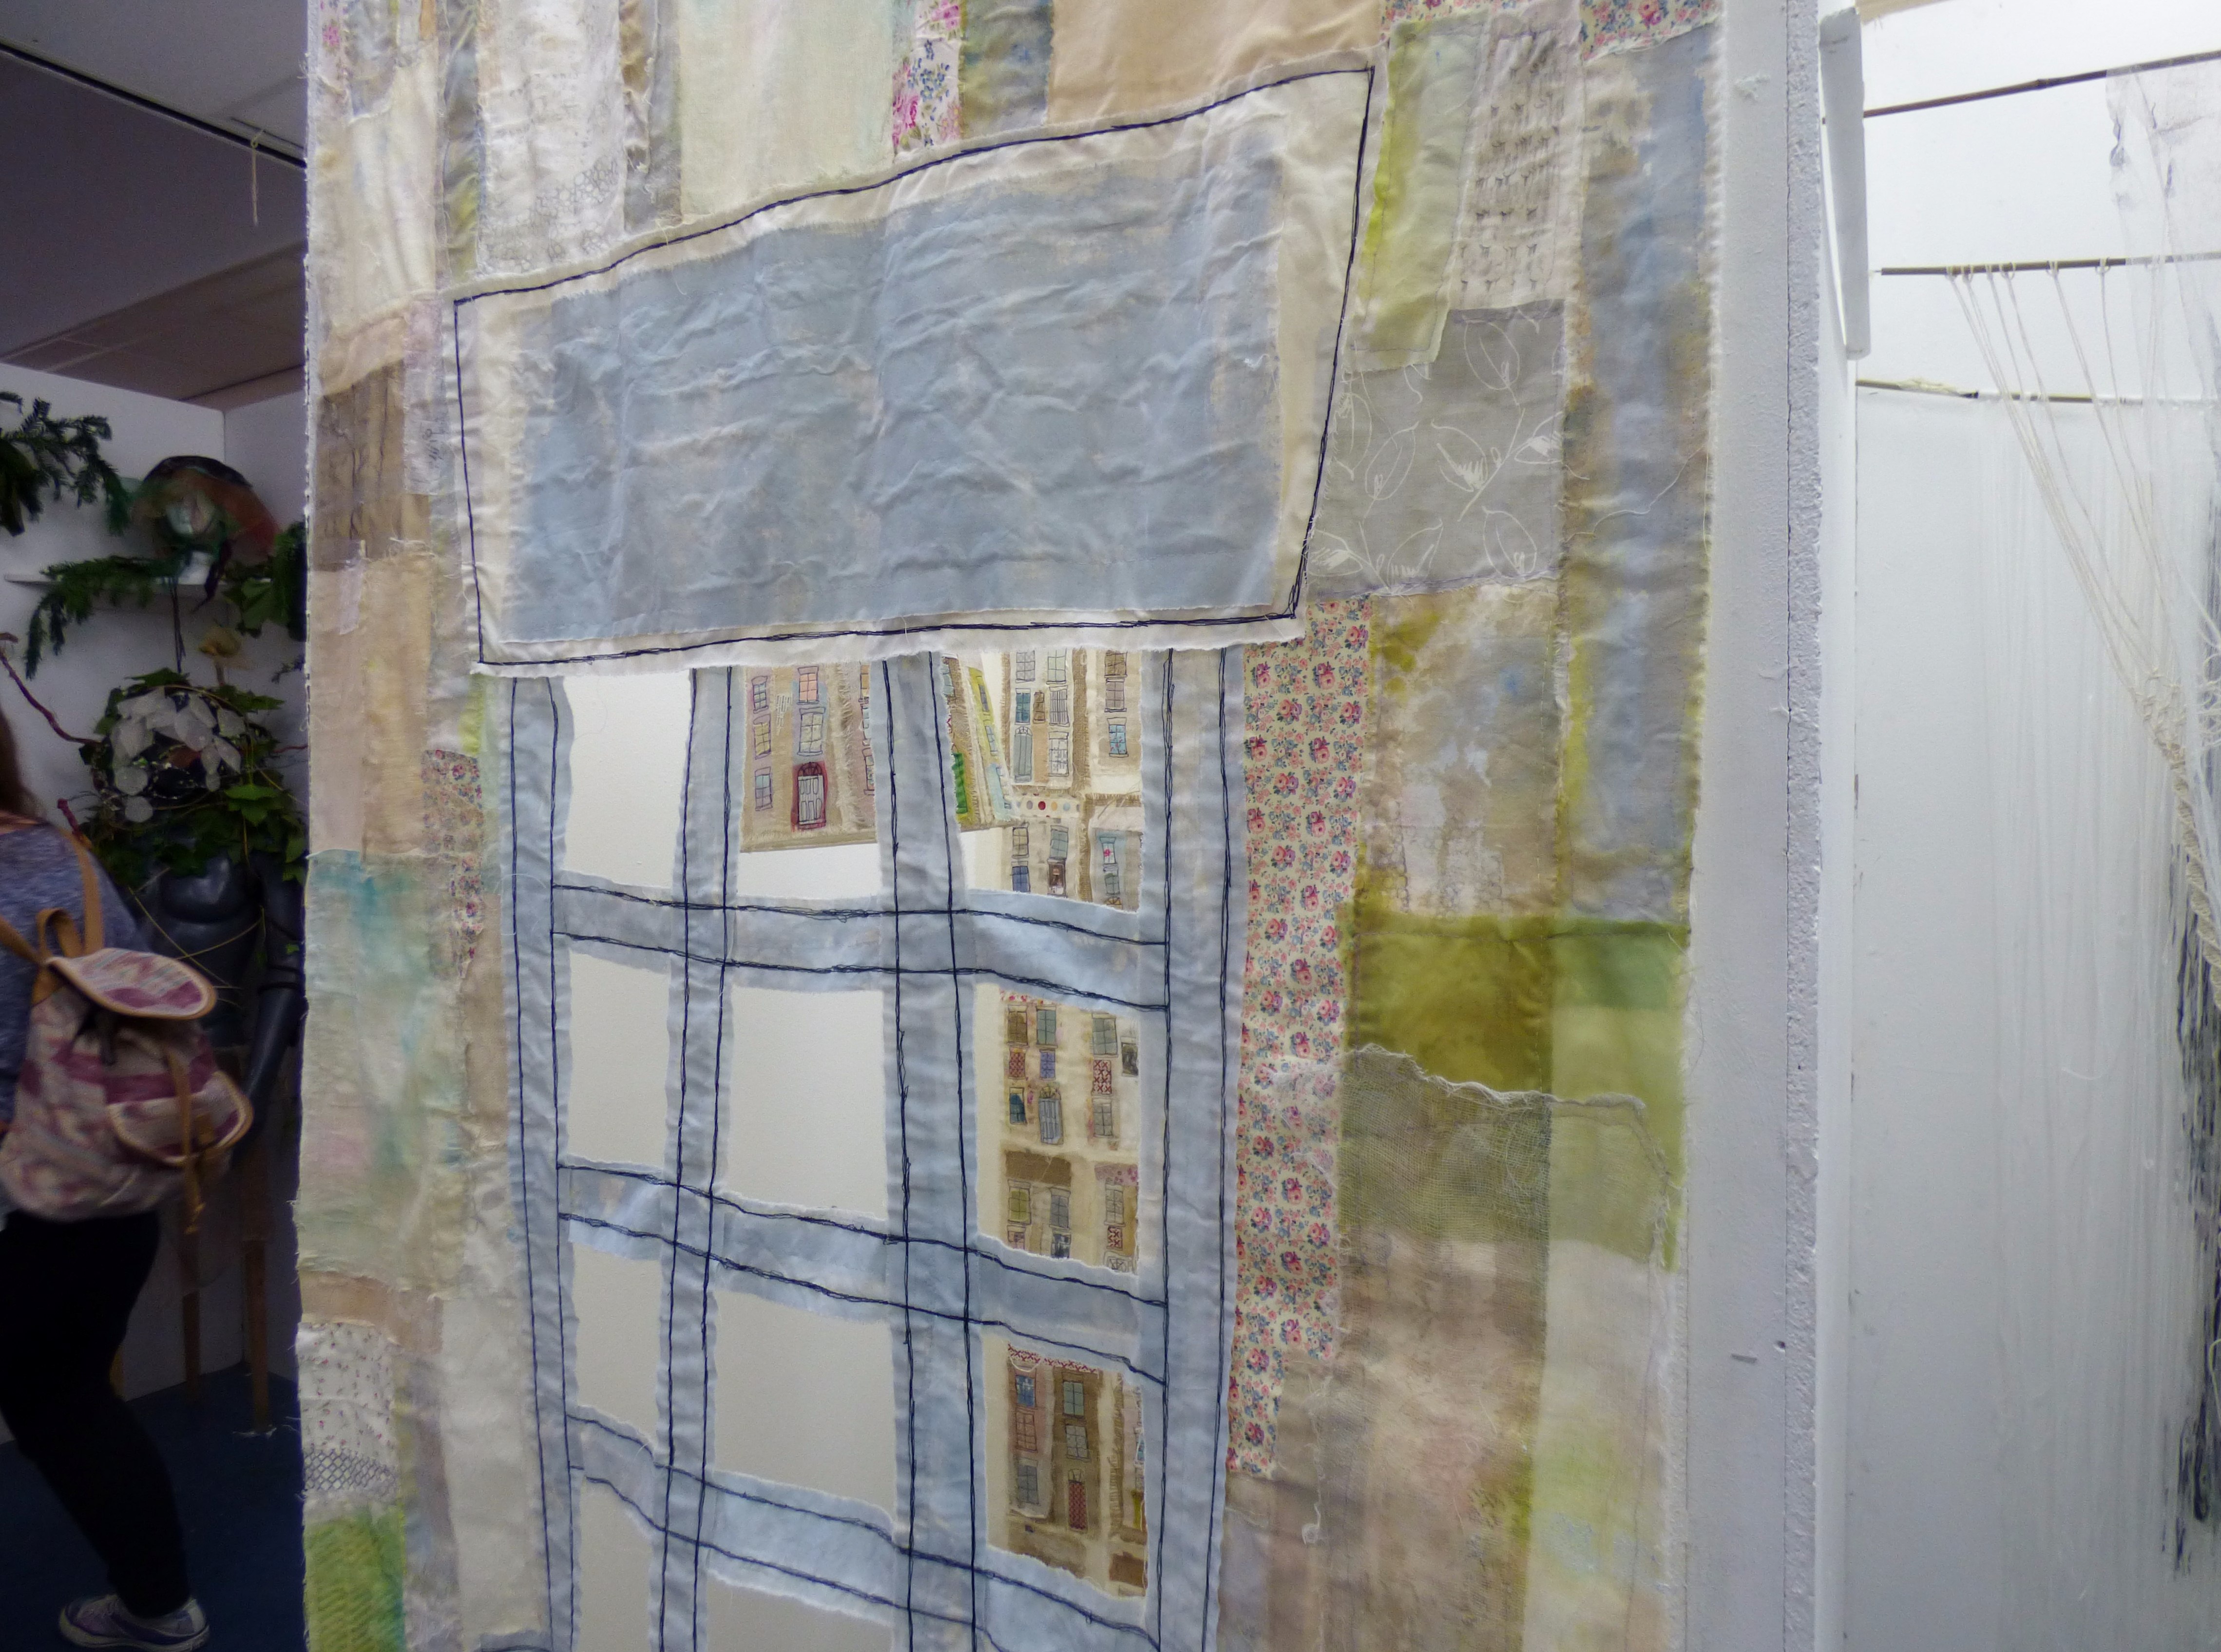 detail of textile art by Ann Knight for Foundation art show at Liverpool Art College 2016